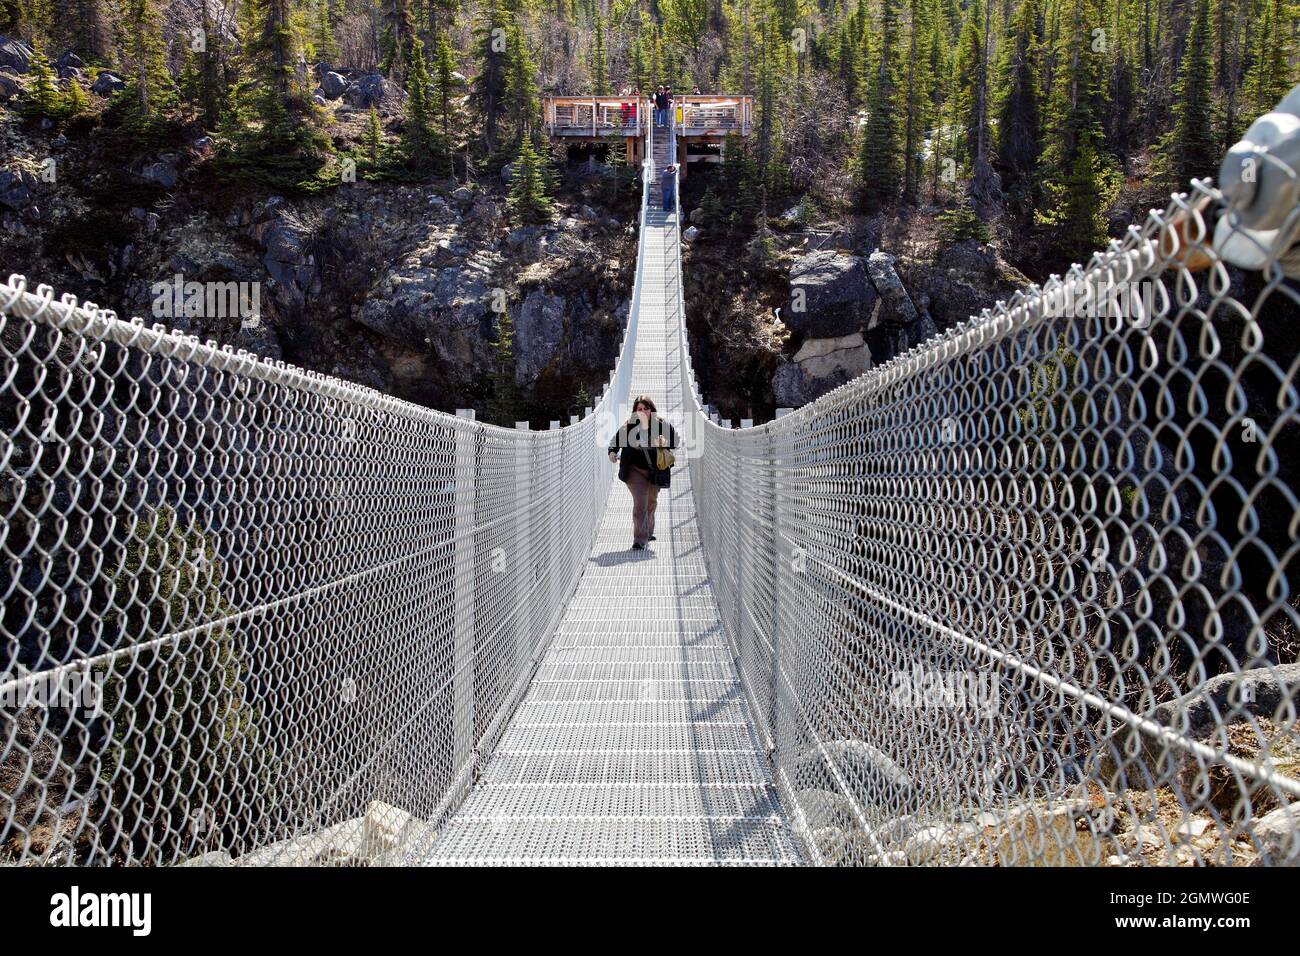 British Columbia, Canada - 24 May 20120; one person in view. This scary bridge over the Yukon River in Canada spans a steep valley leading to a drop t Stock Photo